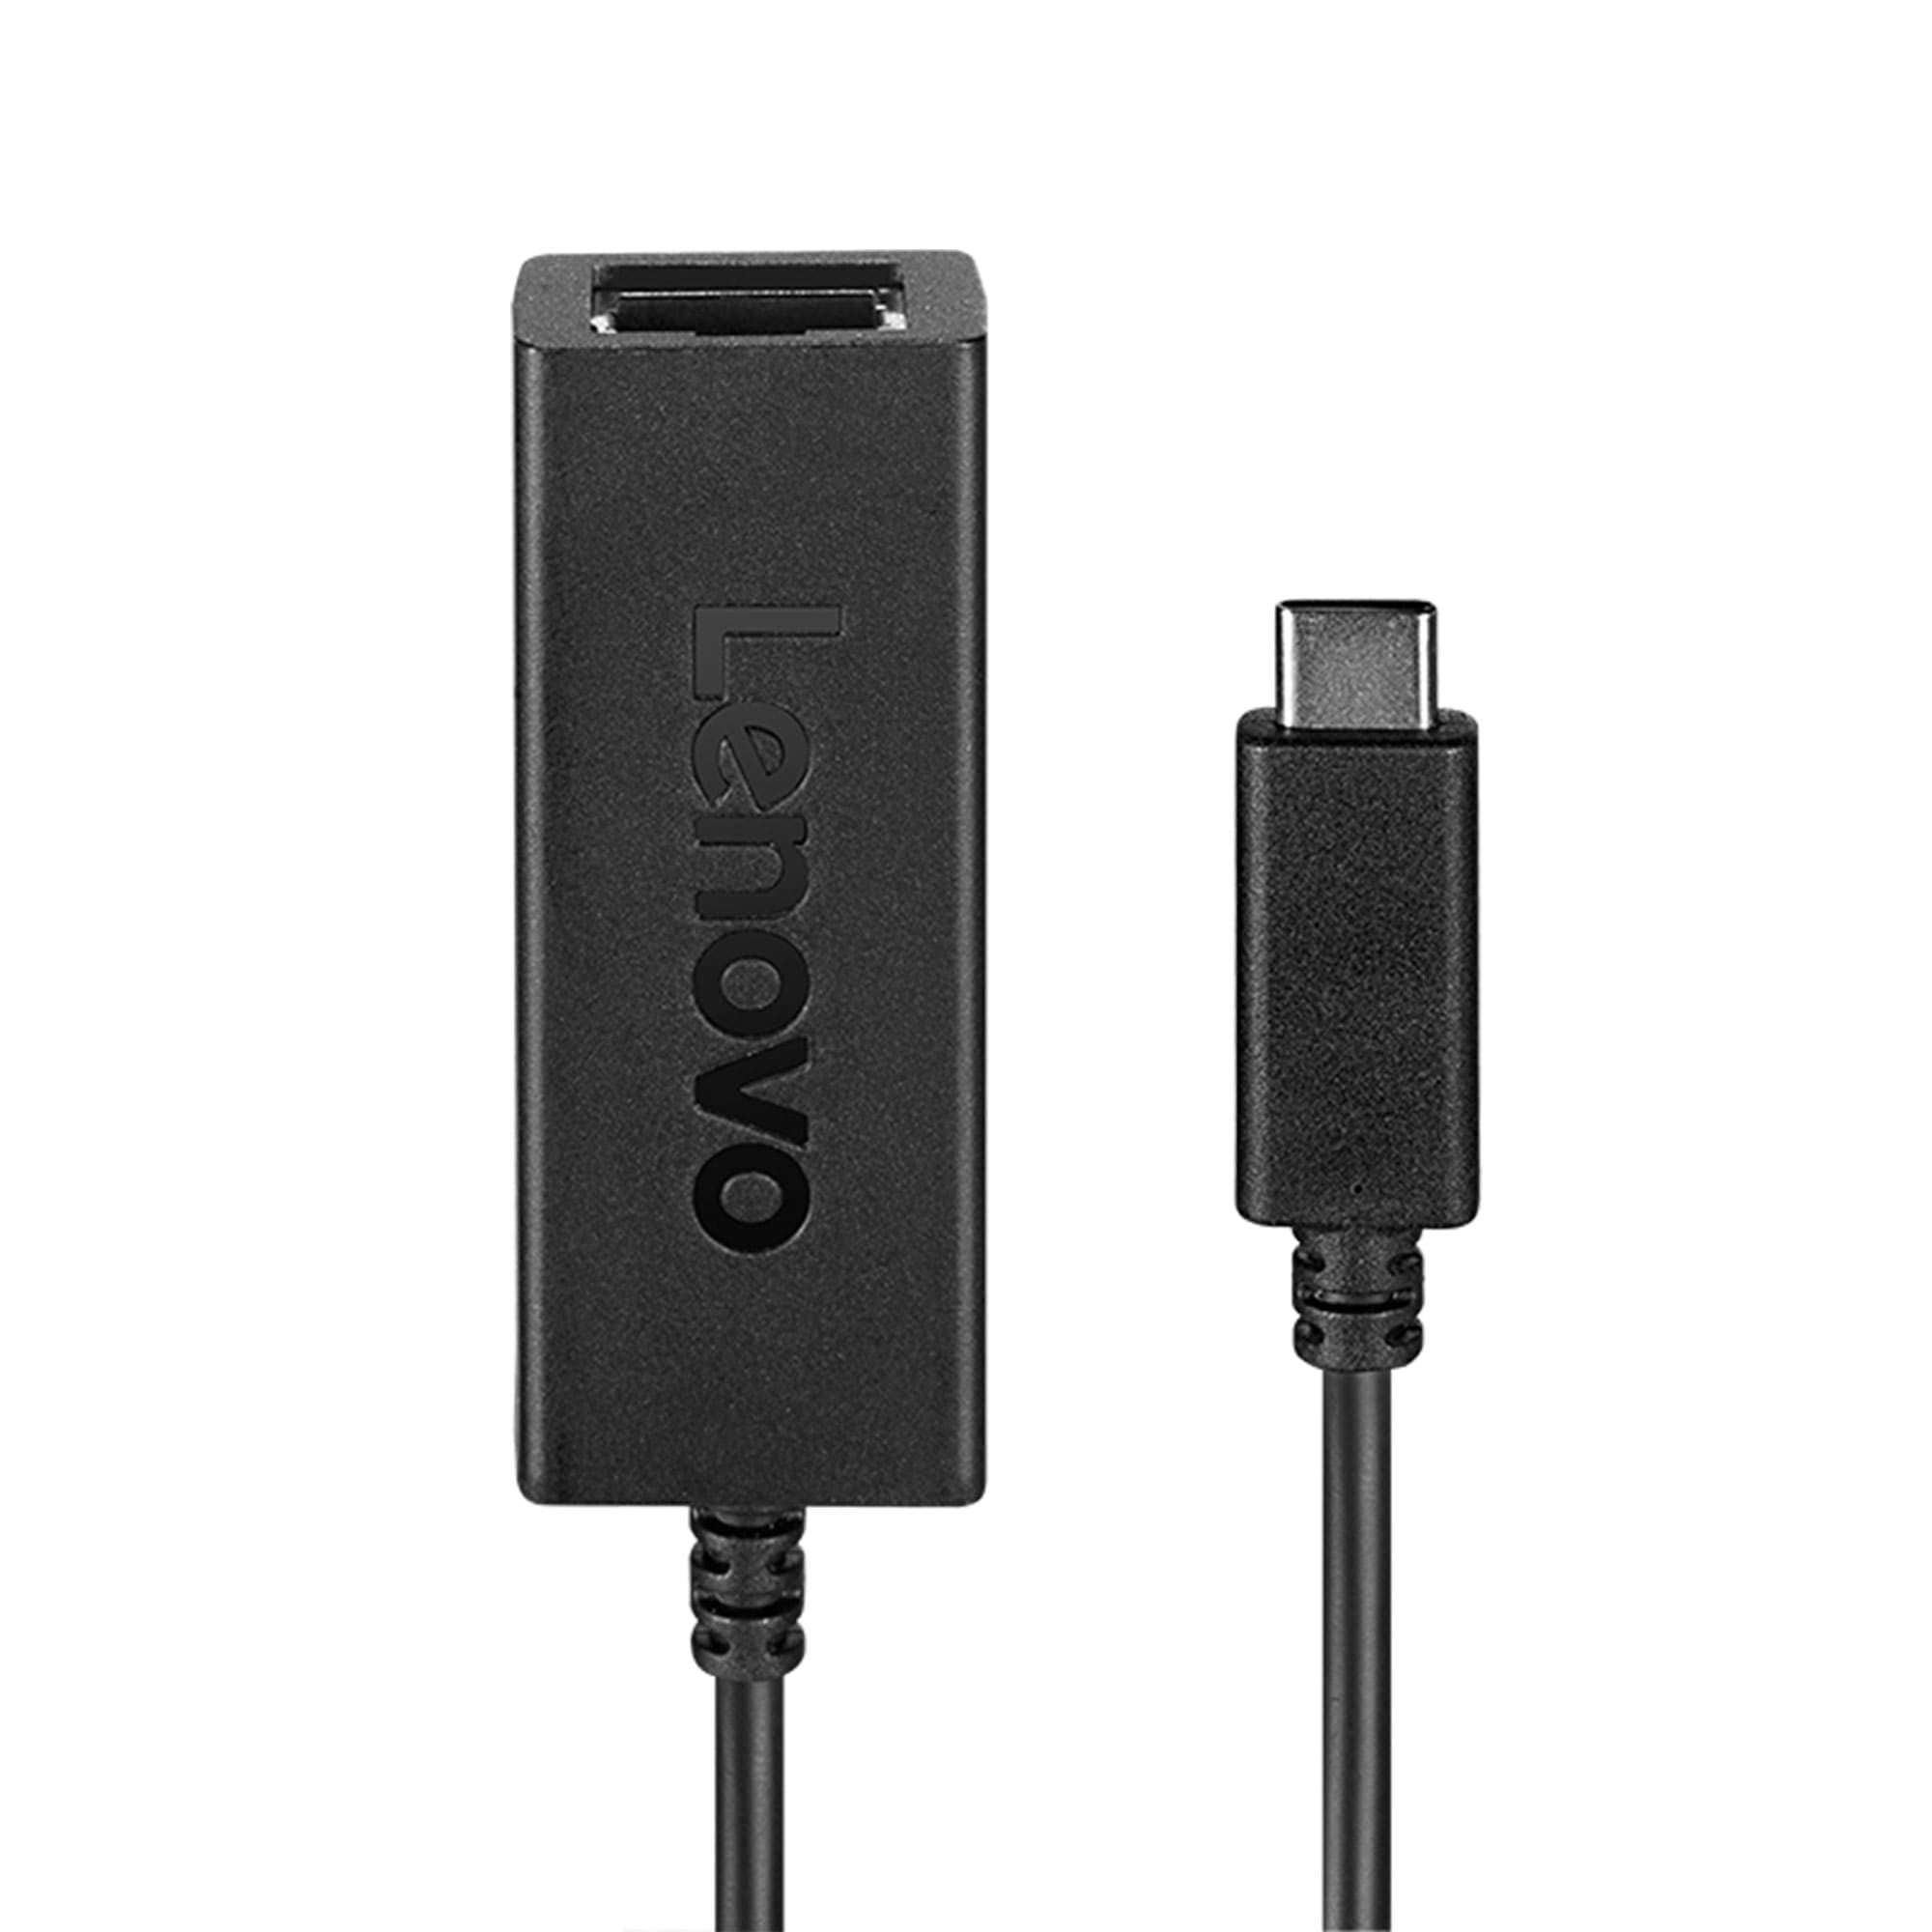 Lenovo USB-C to Ethernet Adapter - RJ-45/USB Network Cable Notebook - First End: 1 x Network - Female - Second End: 1 x USB Type C - Male - 100 Mbit/s - Black - Walmart.com